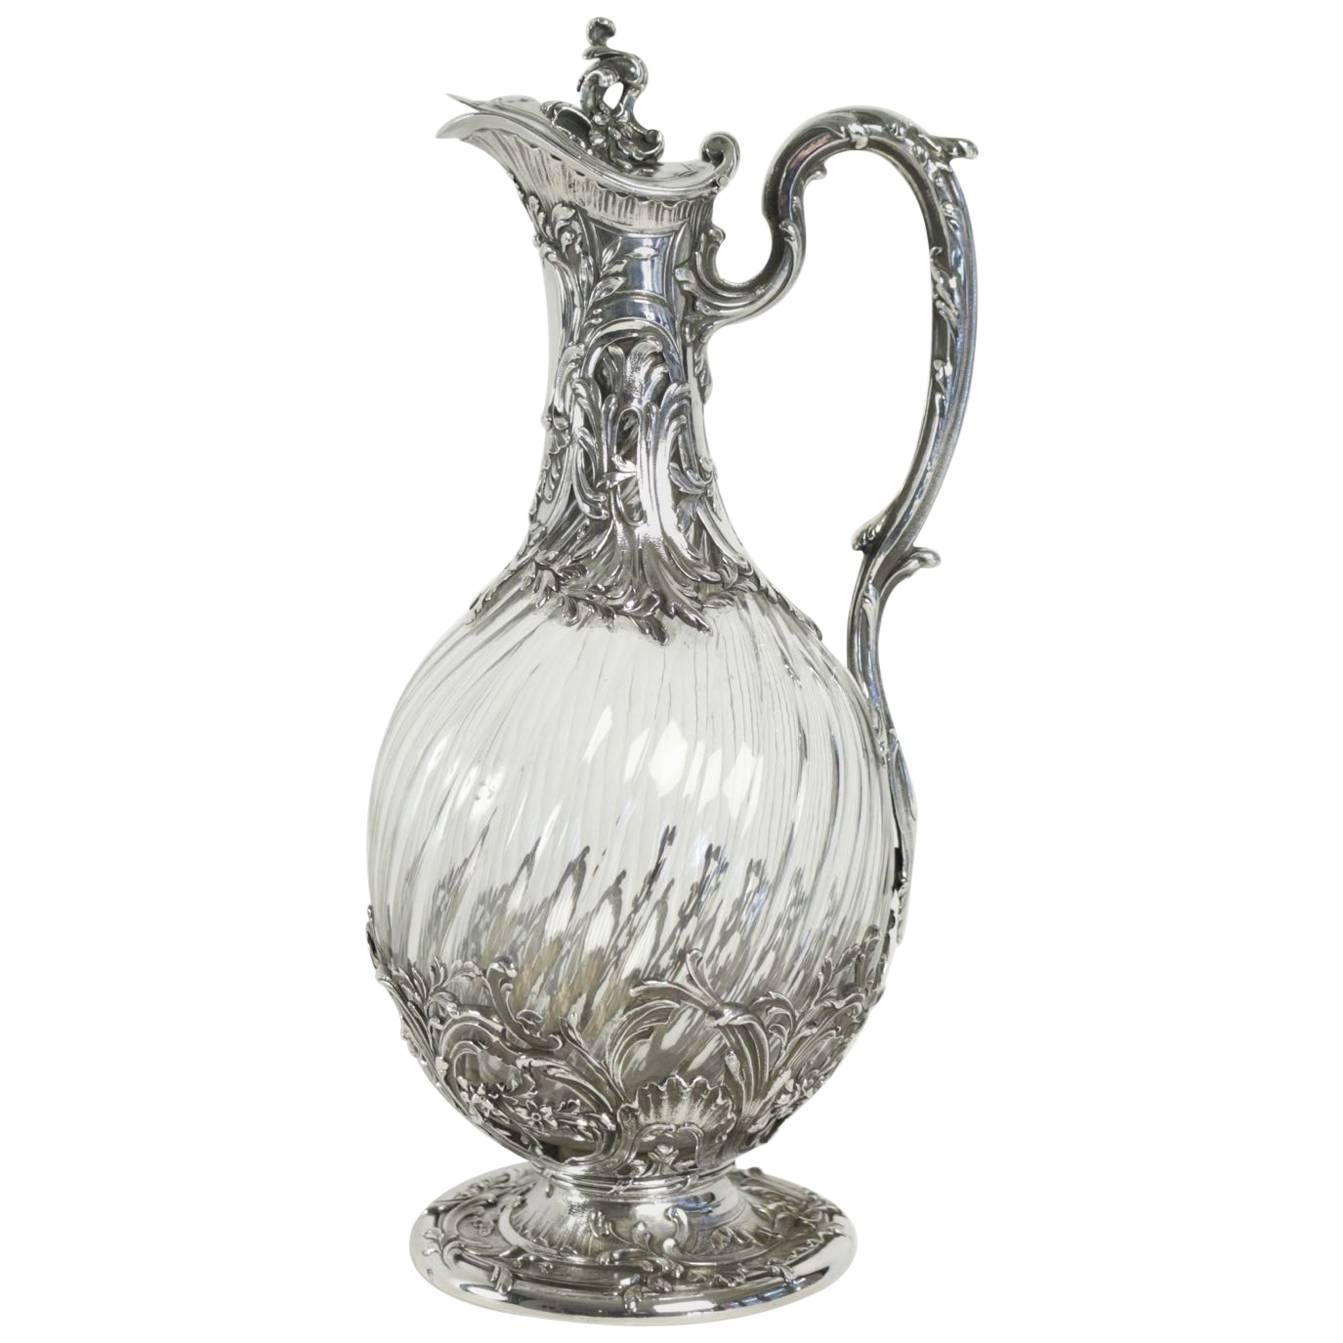 Victor Boivin French Sterling and Crystal "Aiguière" Claret Jug, circa 1880